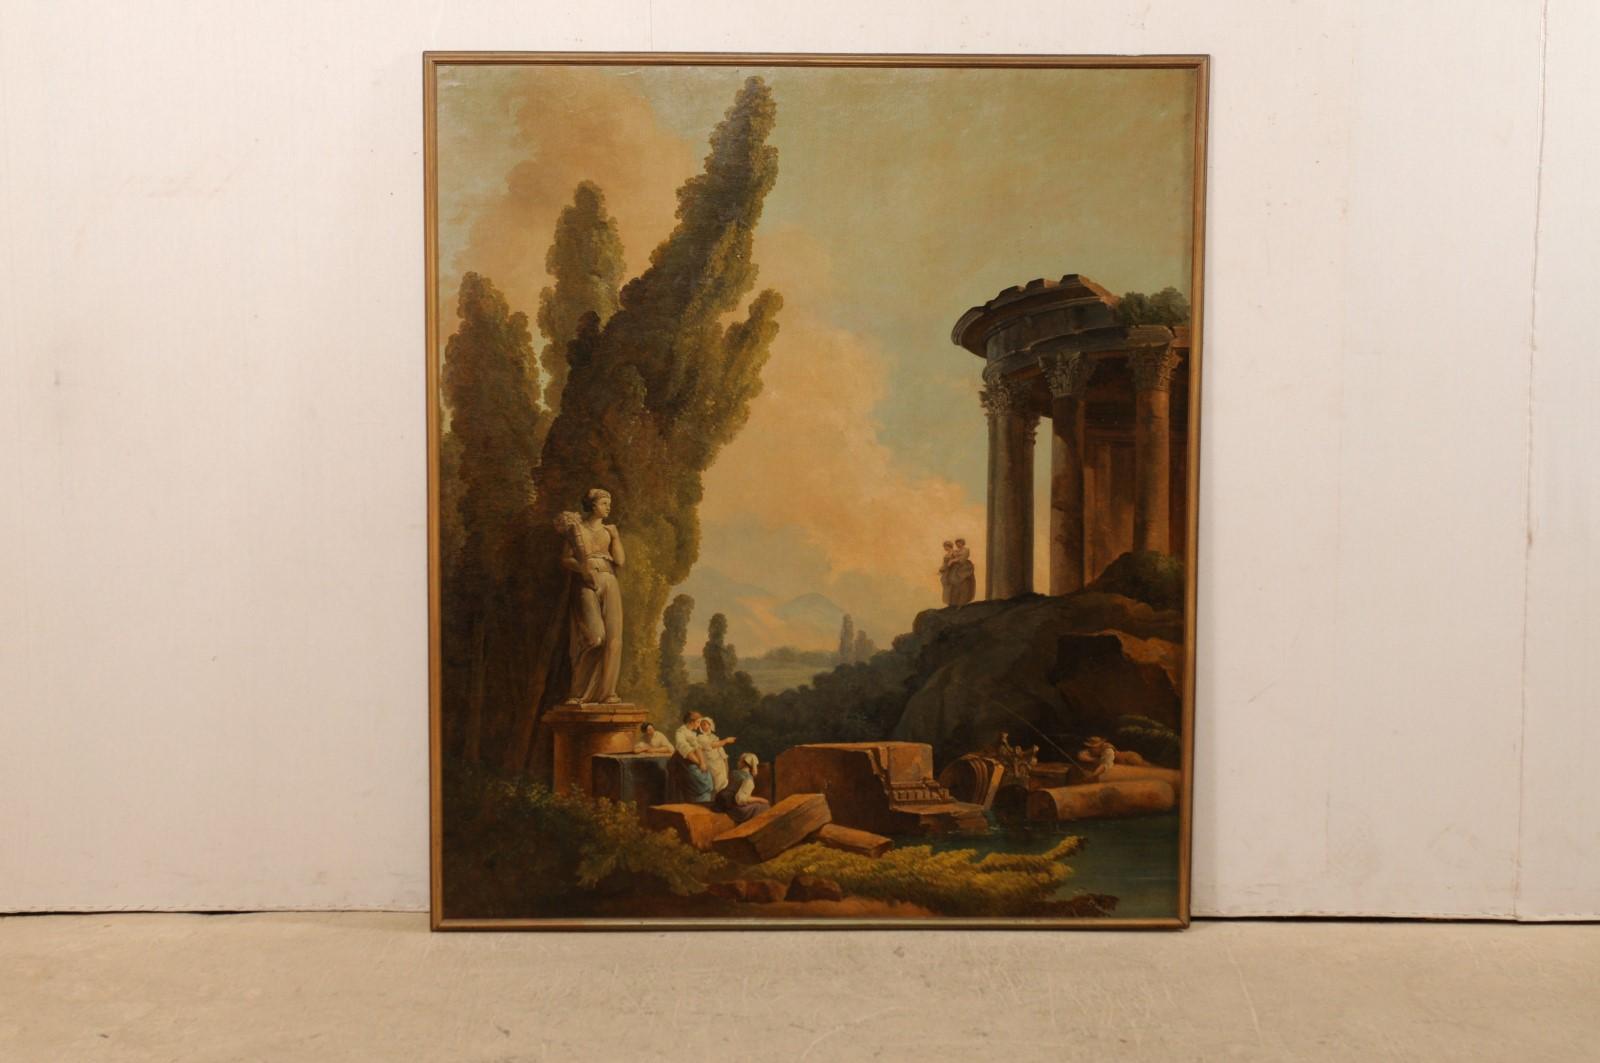 An Italian large-sized painted wall panel from the 19th century, artist unknown. This antique artisan painted and framed wall panel from Italy is a lovely capriccio depicting a classical Romanesque ruins landscape animated with maidens gathering and